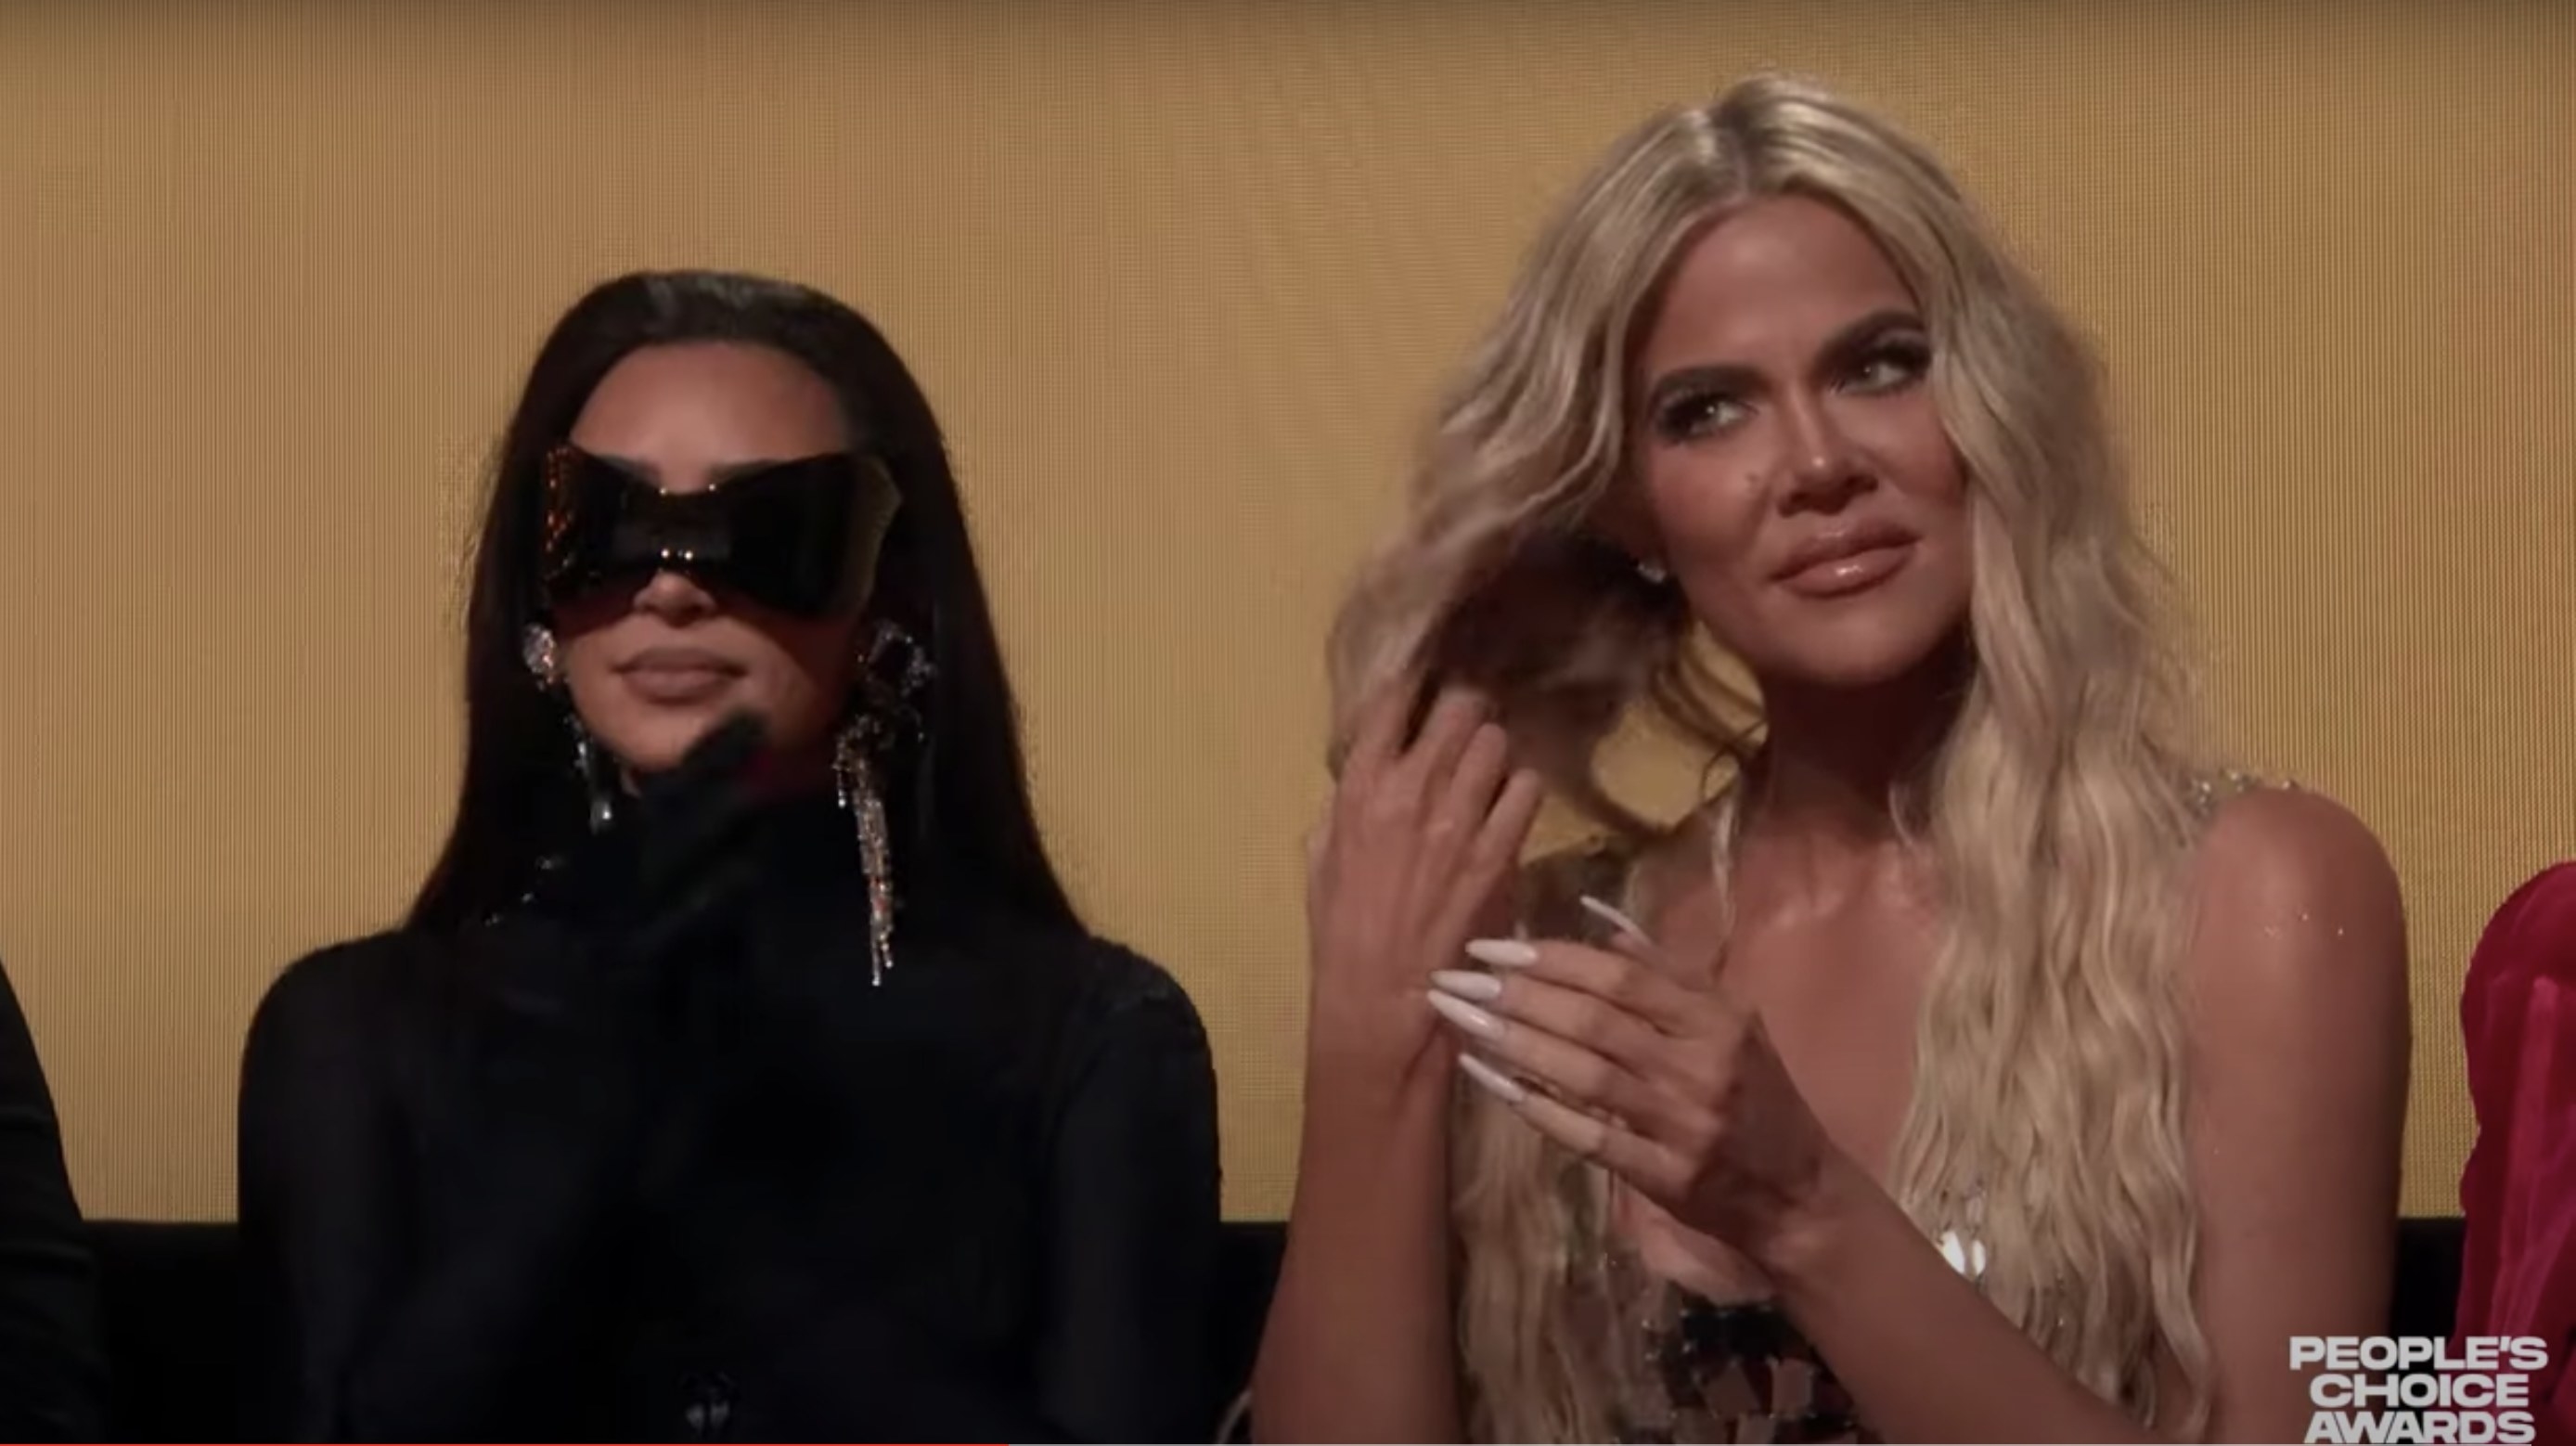 Khloe flips her hair while sitting in the audience while Halle speaks on stage